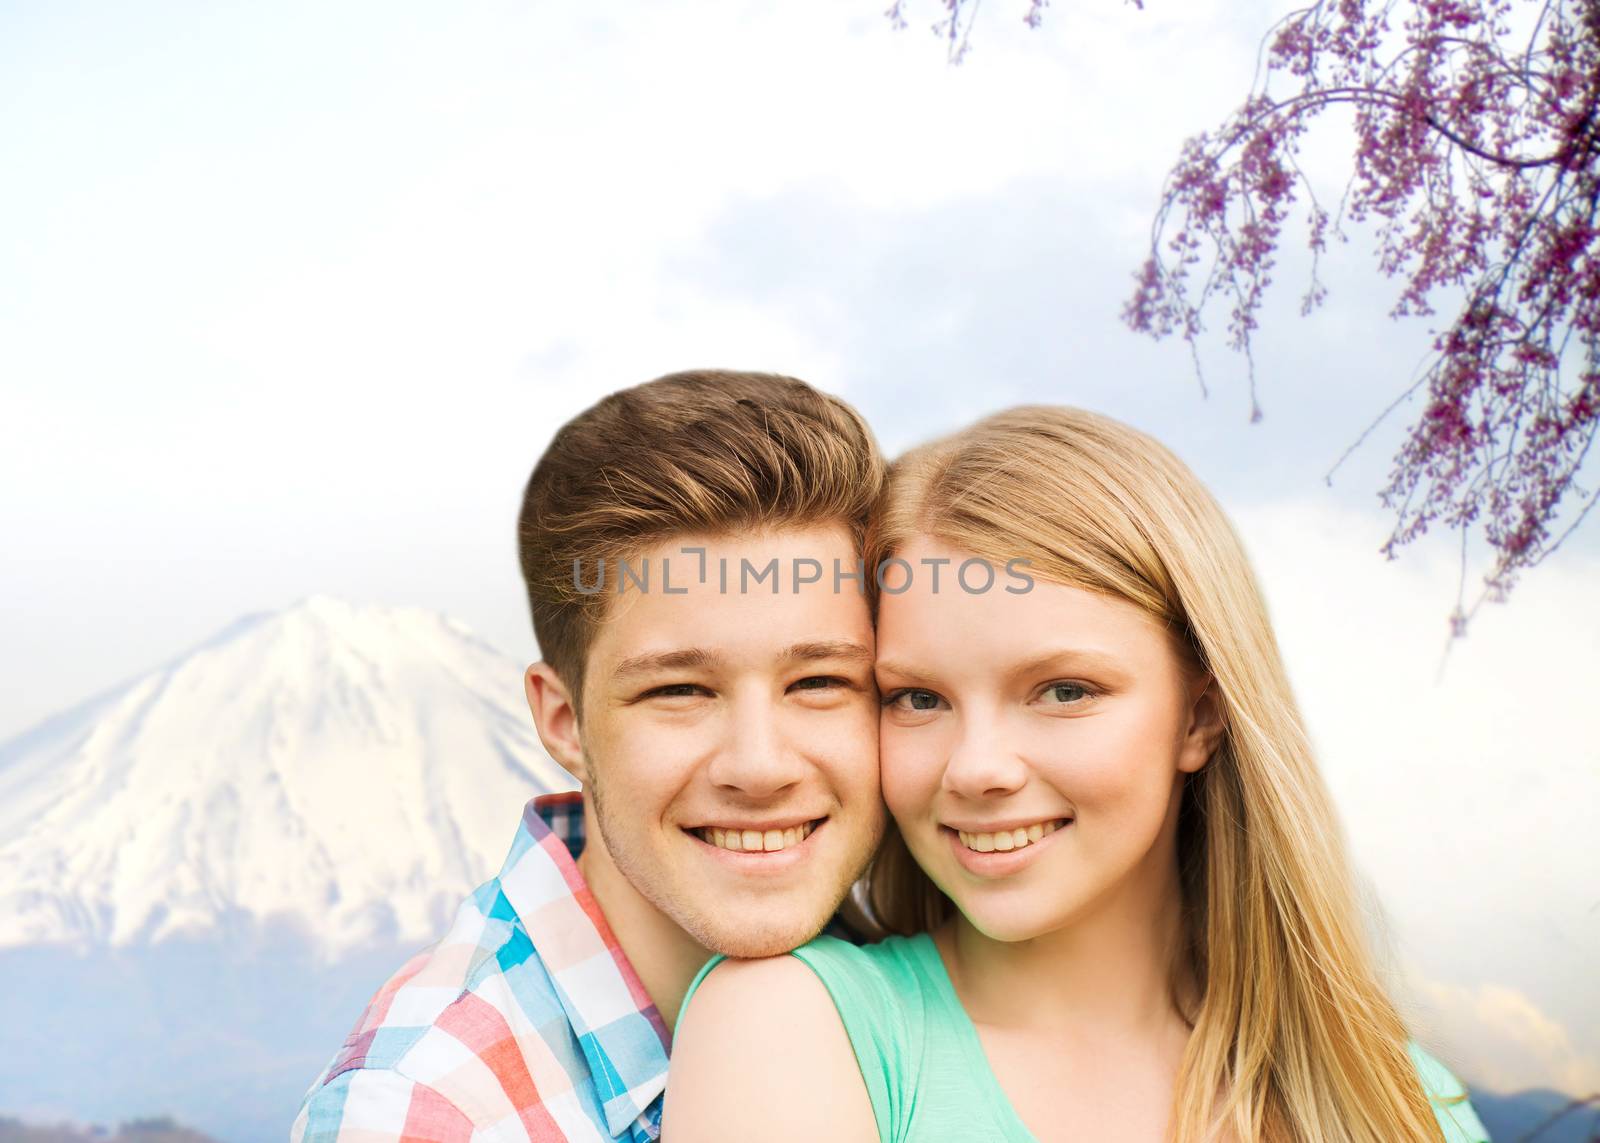 smiling couple hugging over mountains background by dolgachov